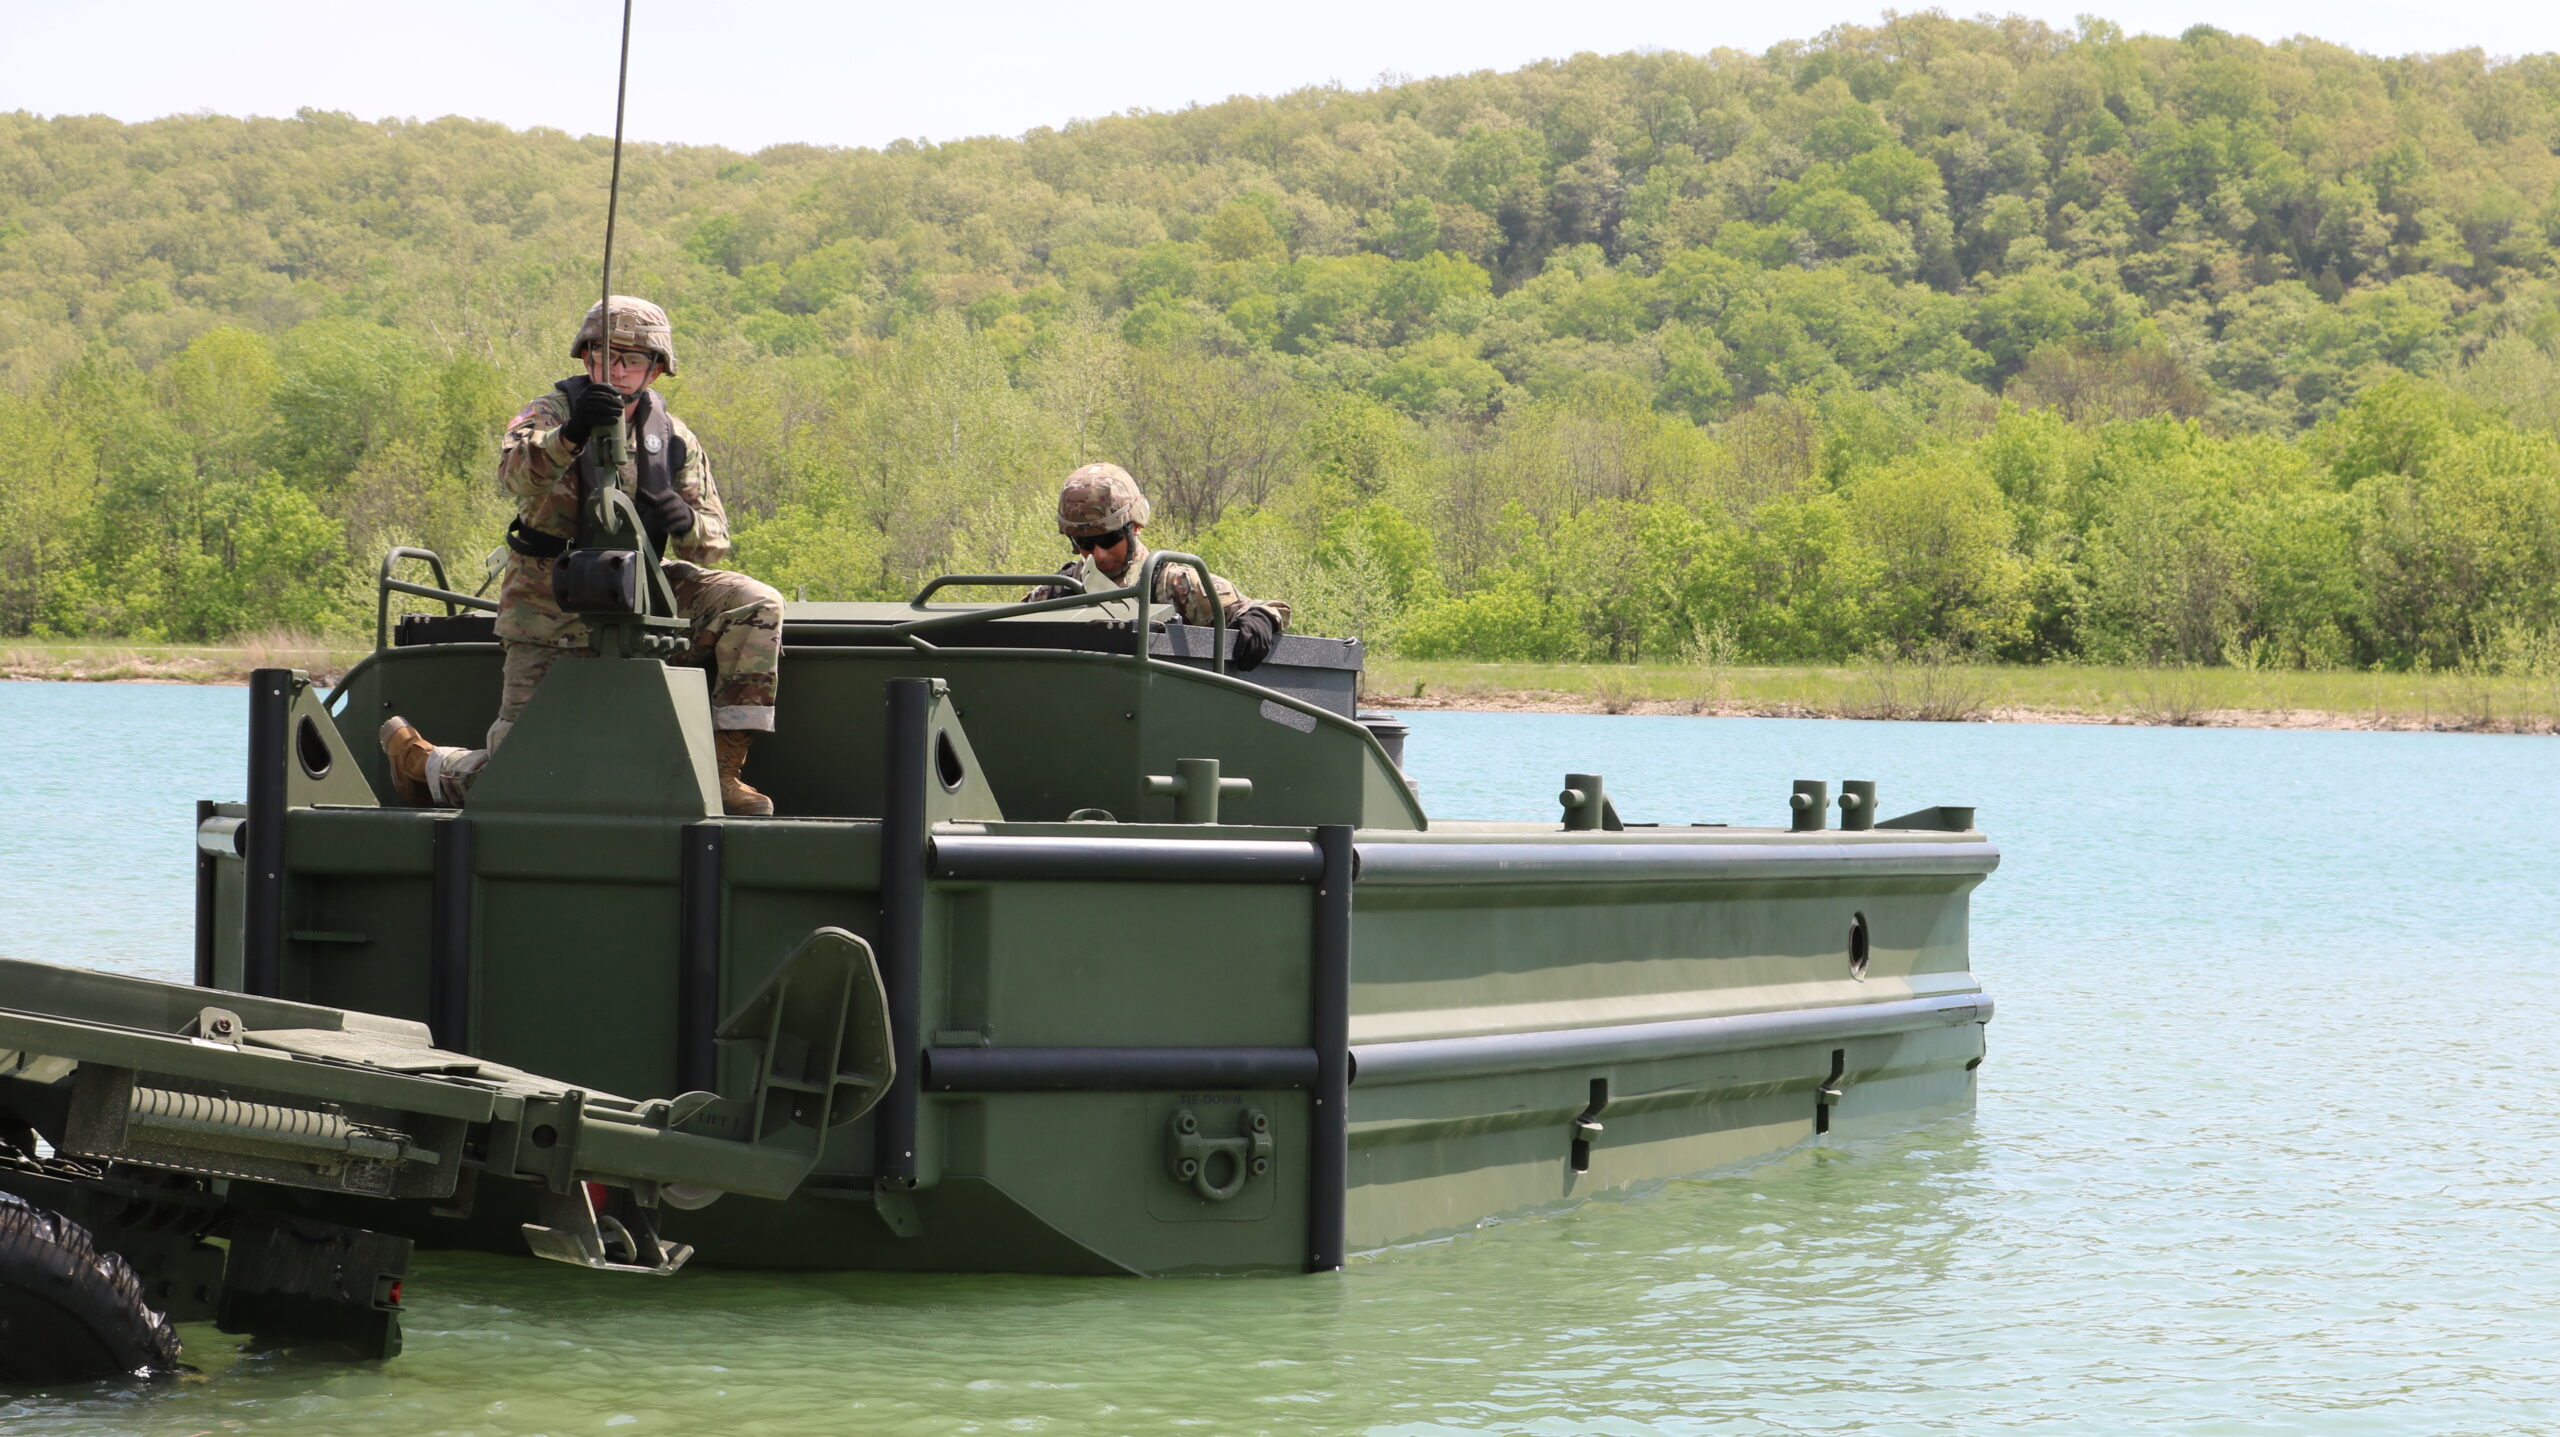 The M30 Bridge Erection Boat launches into the water during new equipment operator training at Fort Leonard Wood, Mo.